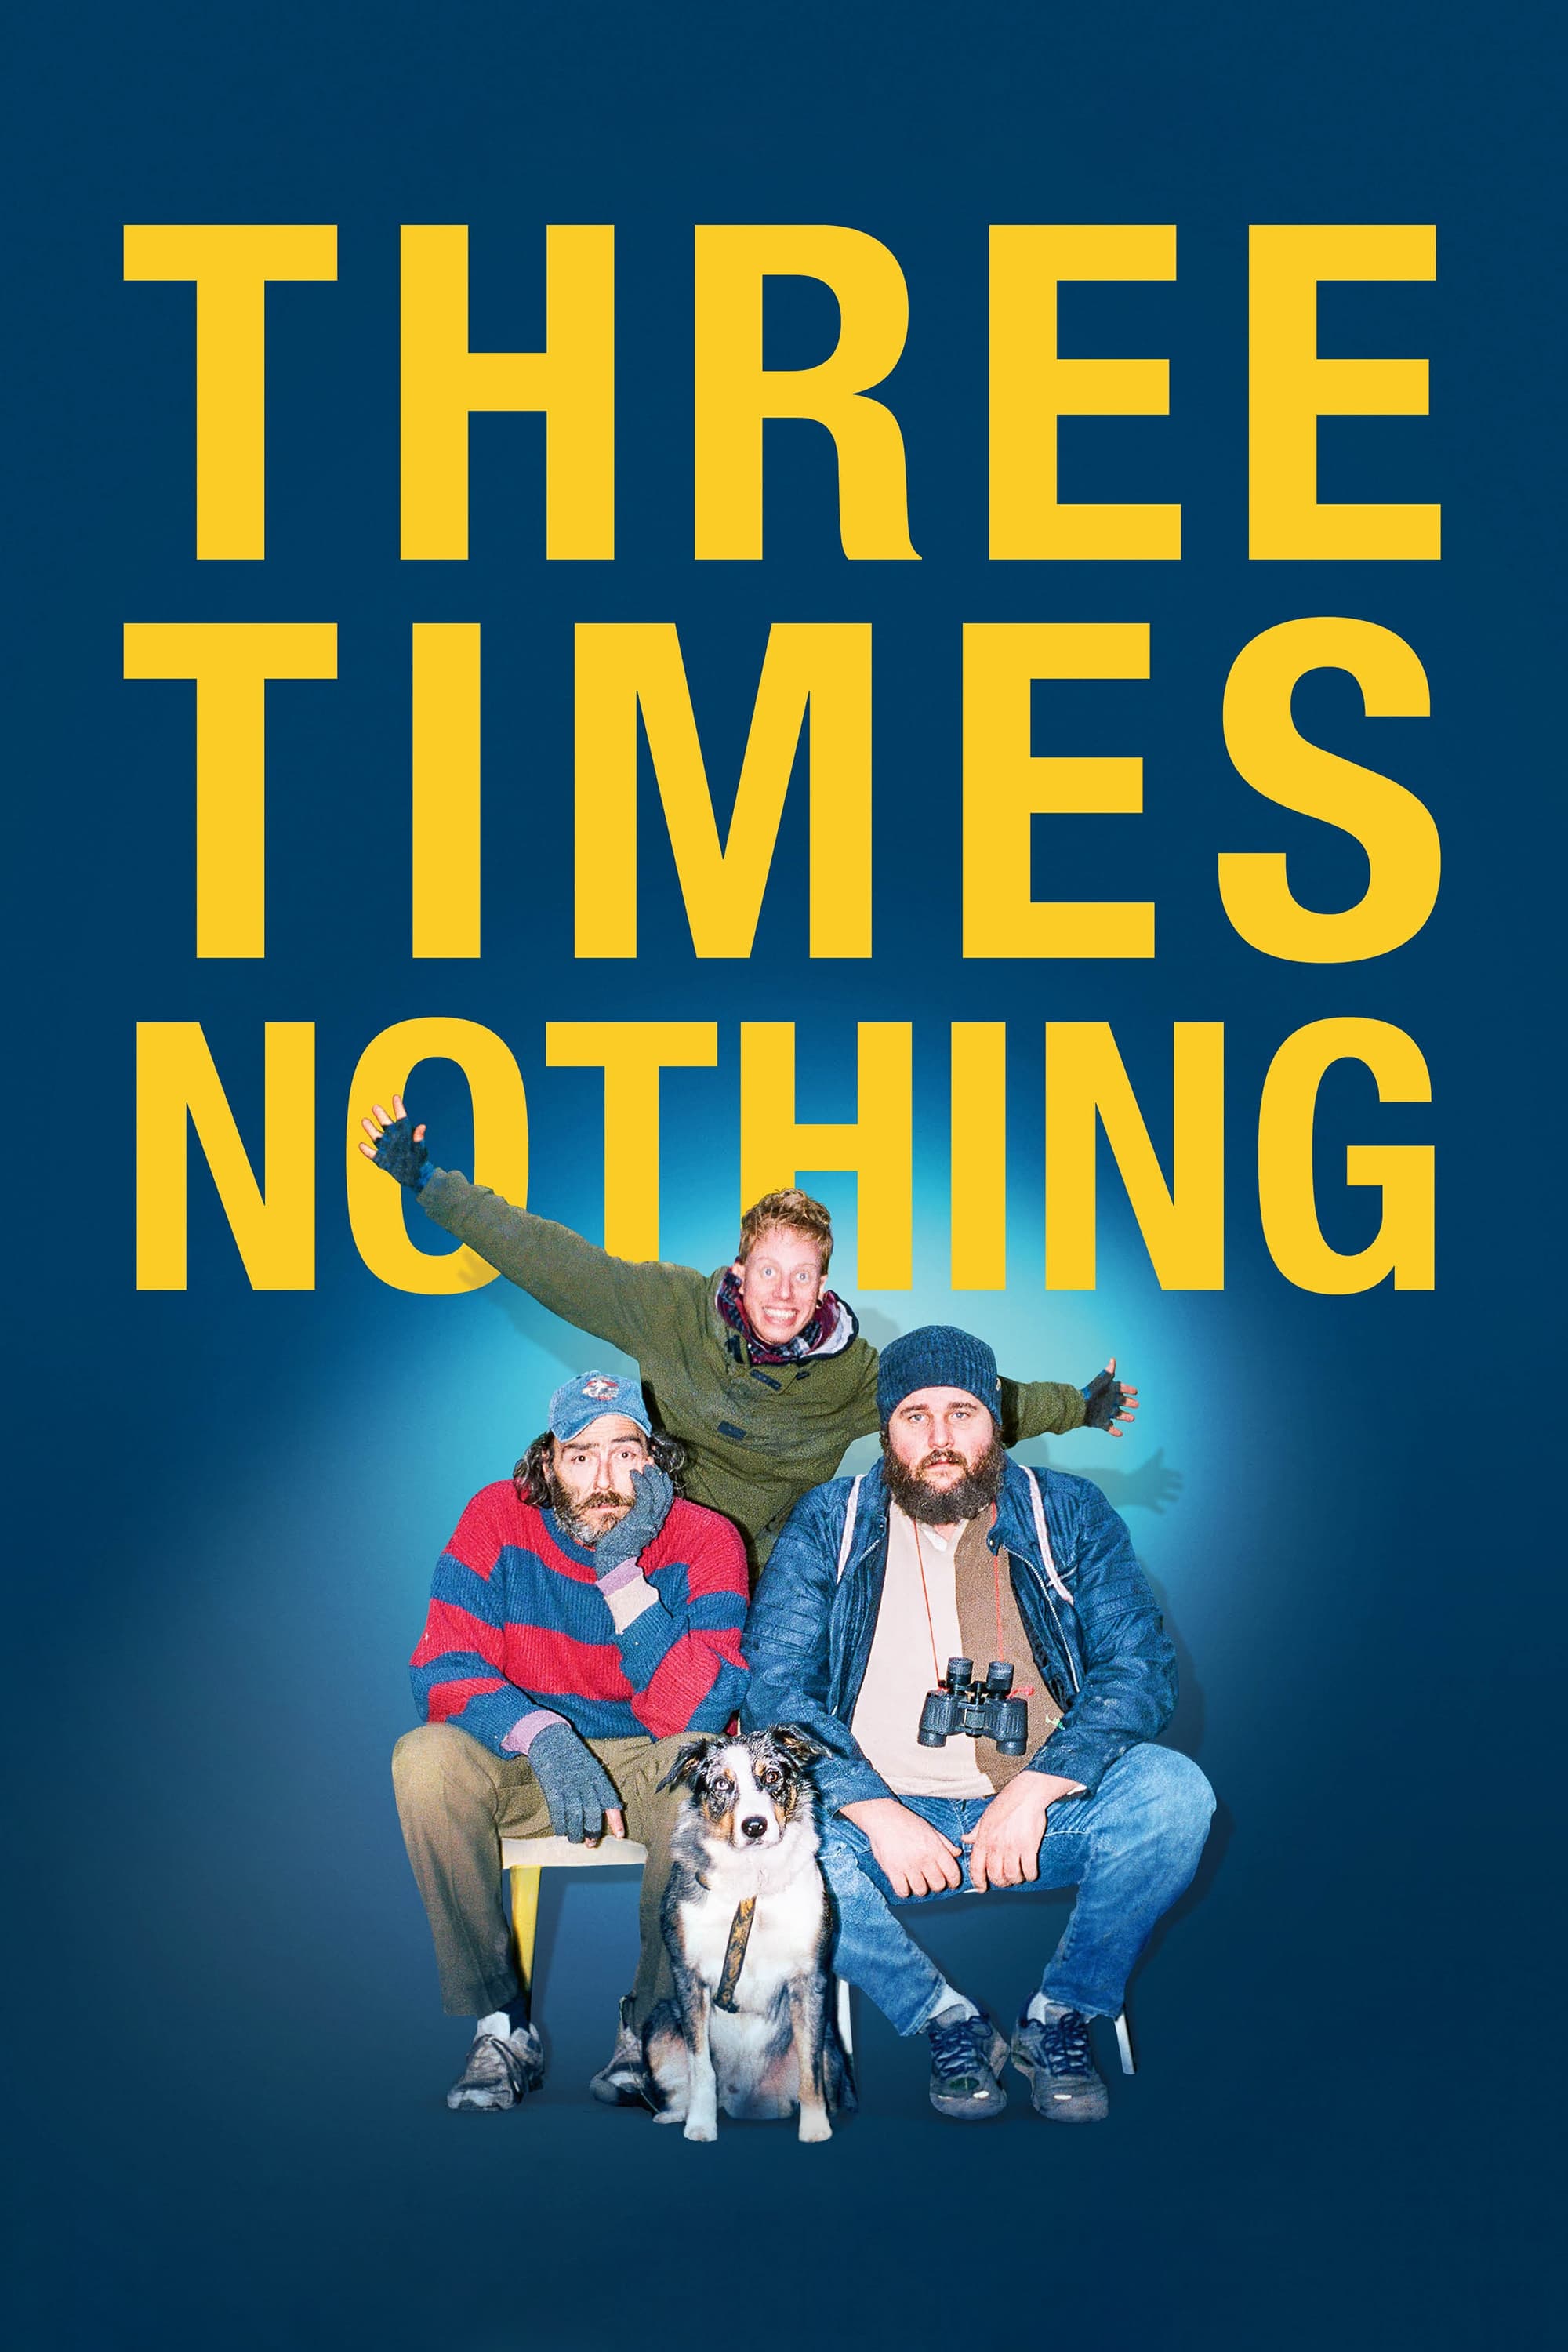 Three Times Nothing